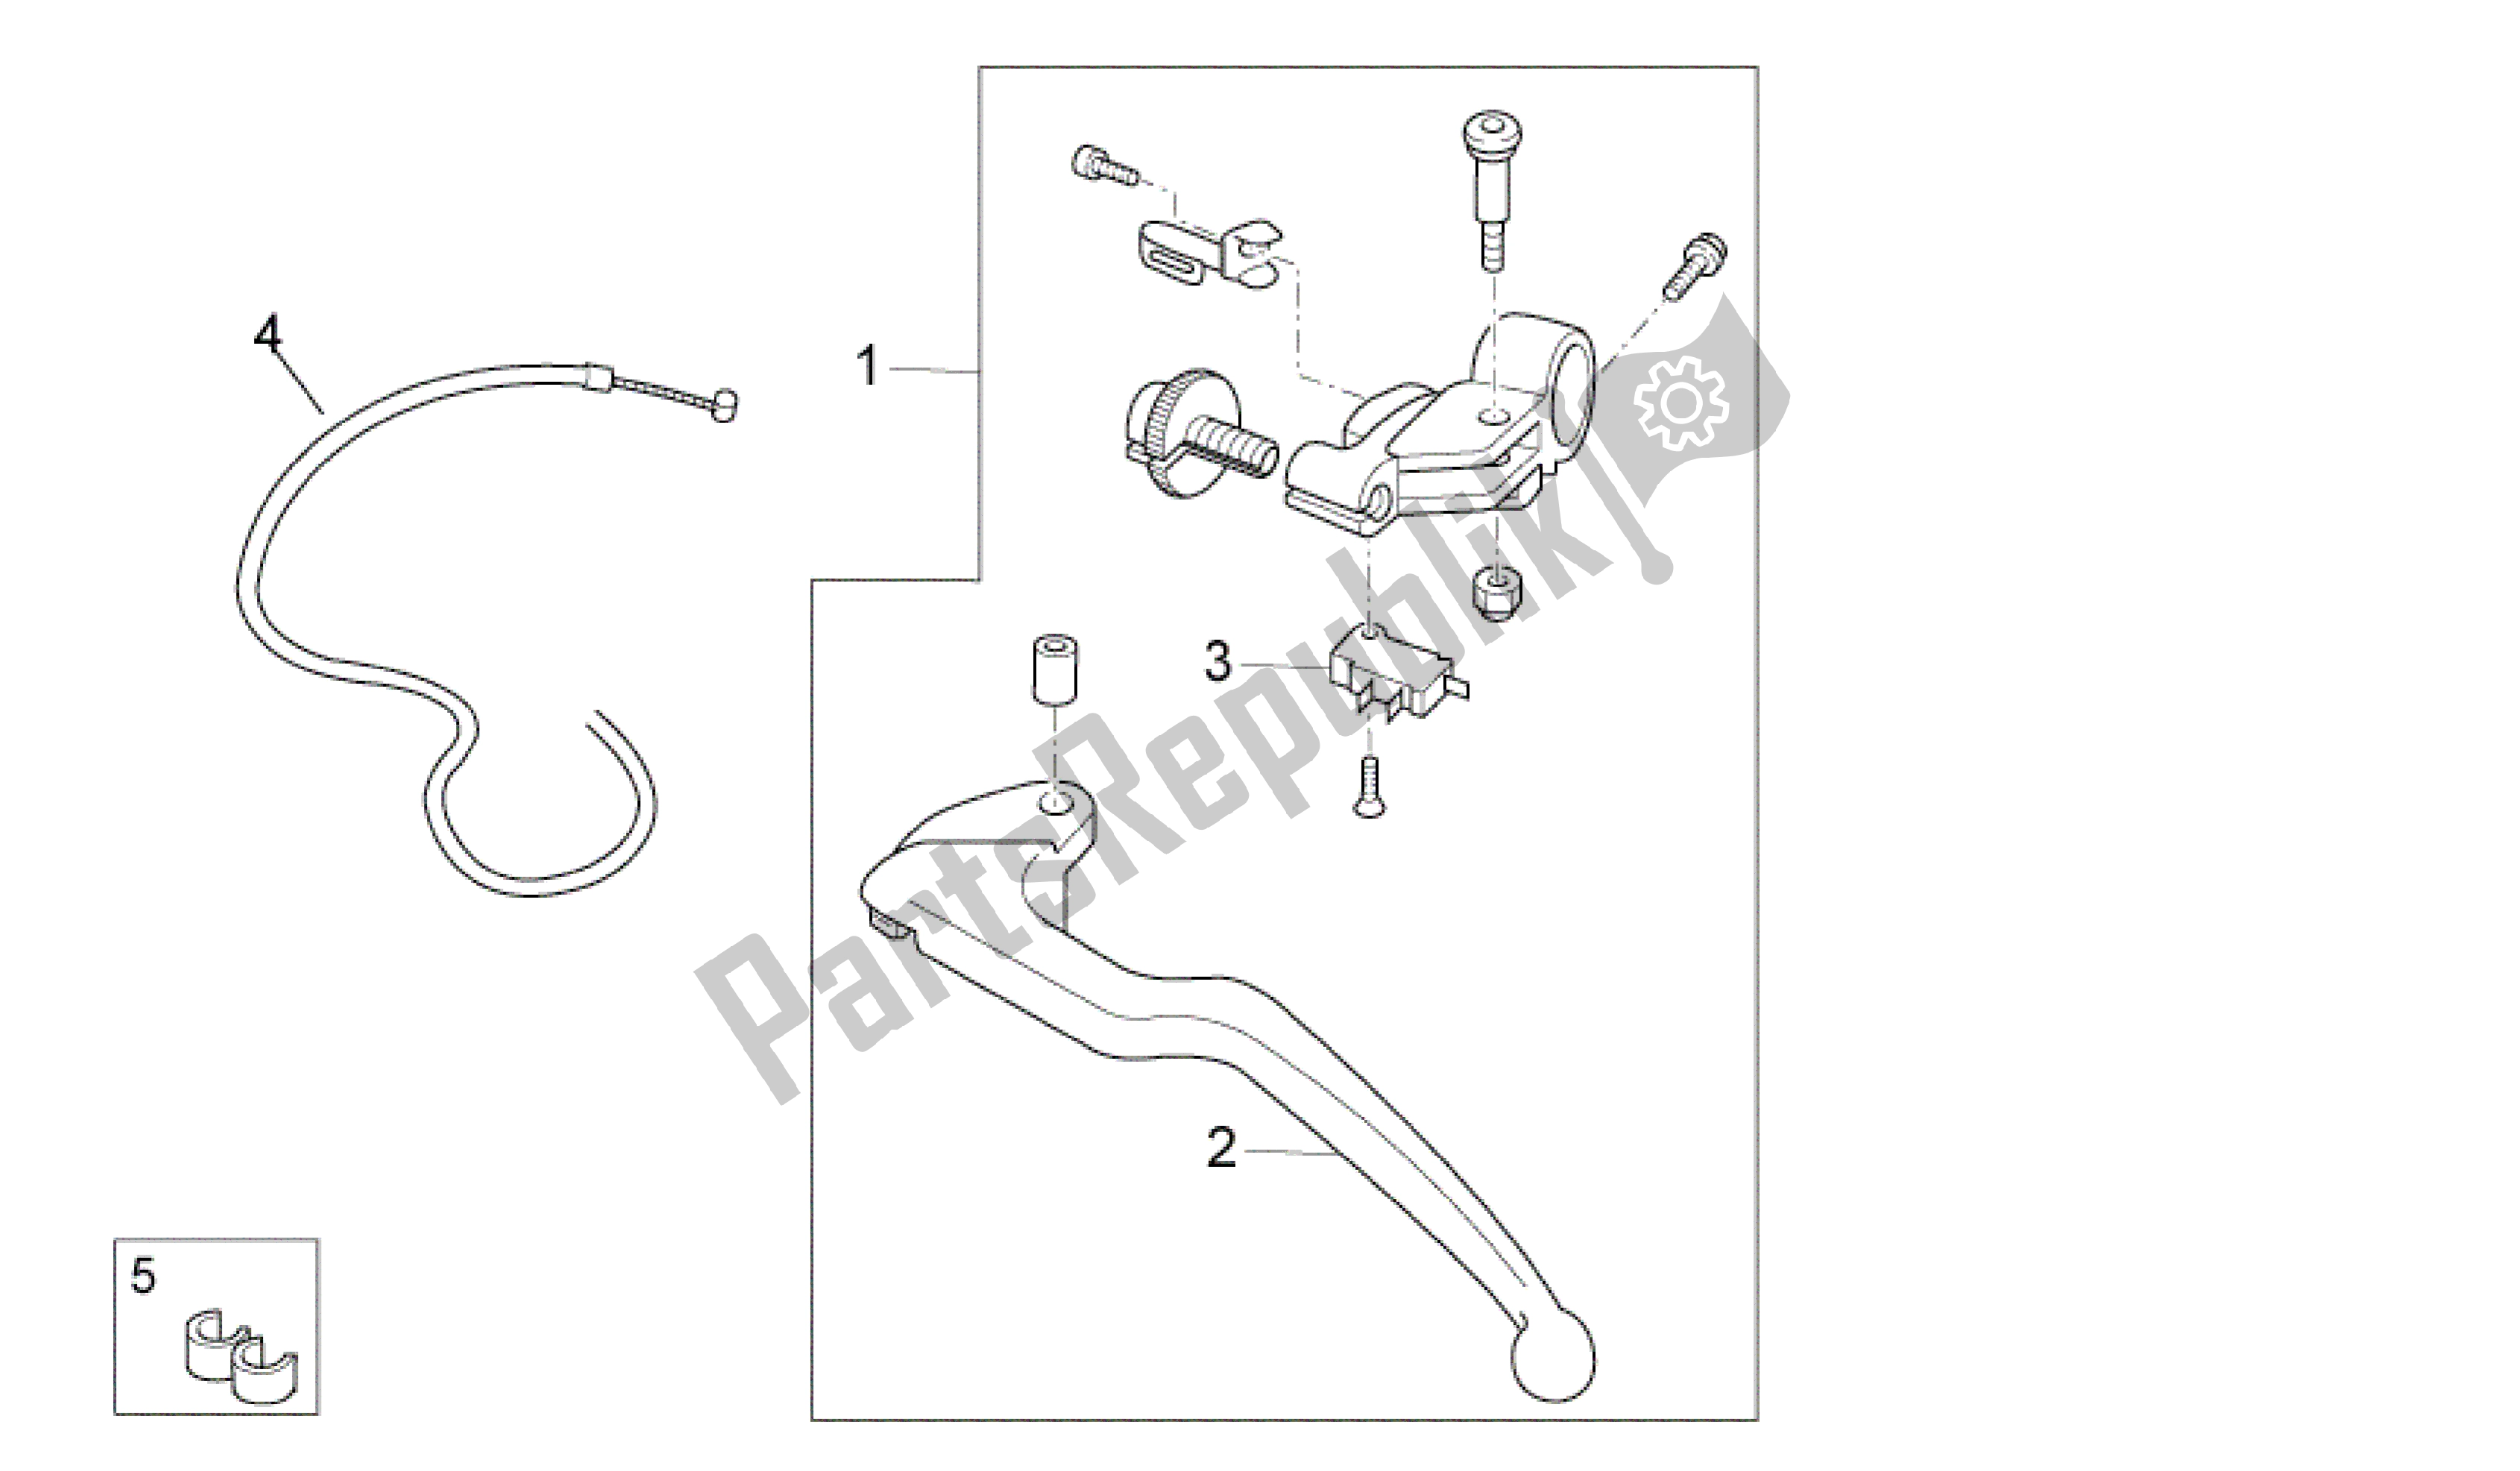 All parts for the Clutch Lever of the Aprilia RSV4 Aprc R 3982 1000 2011 - 2012